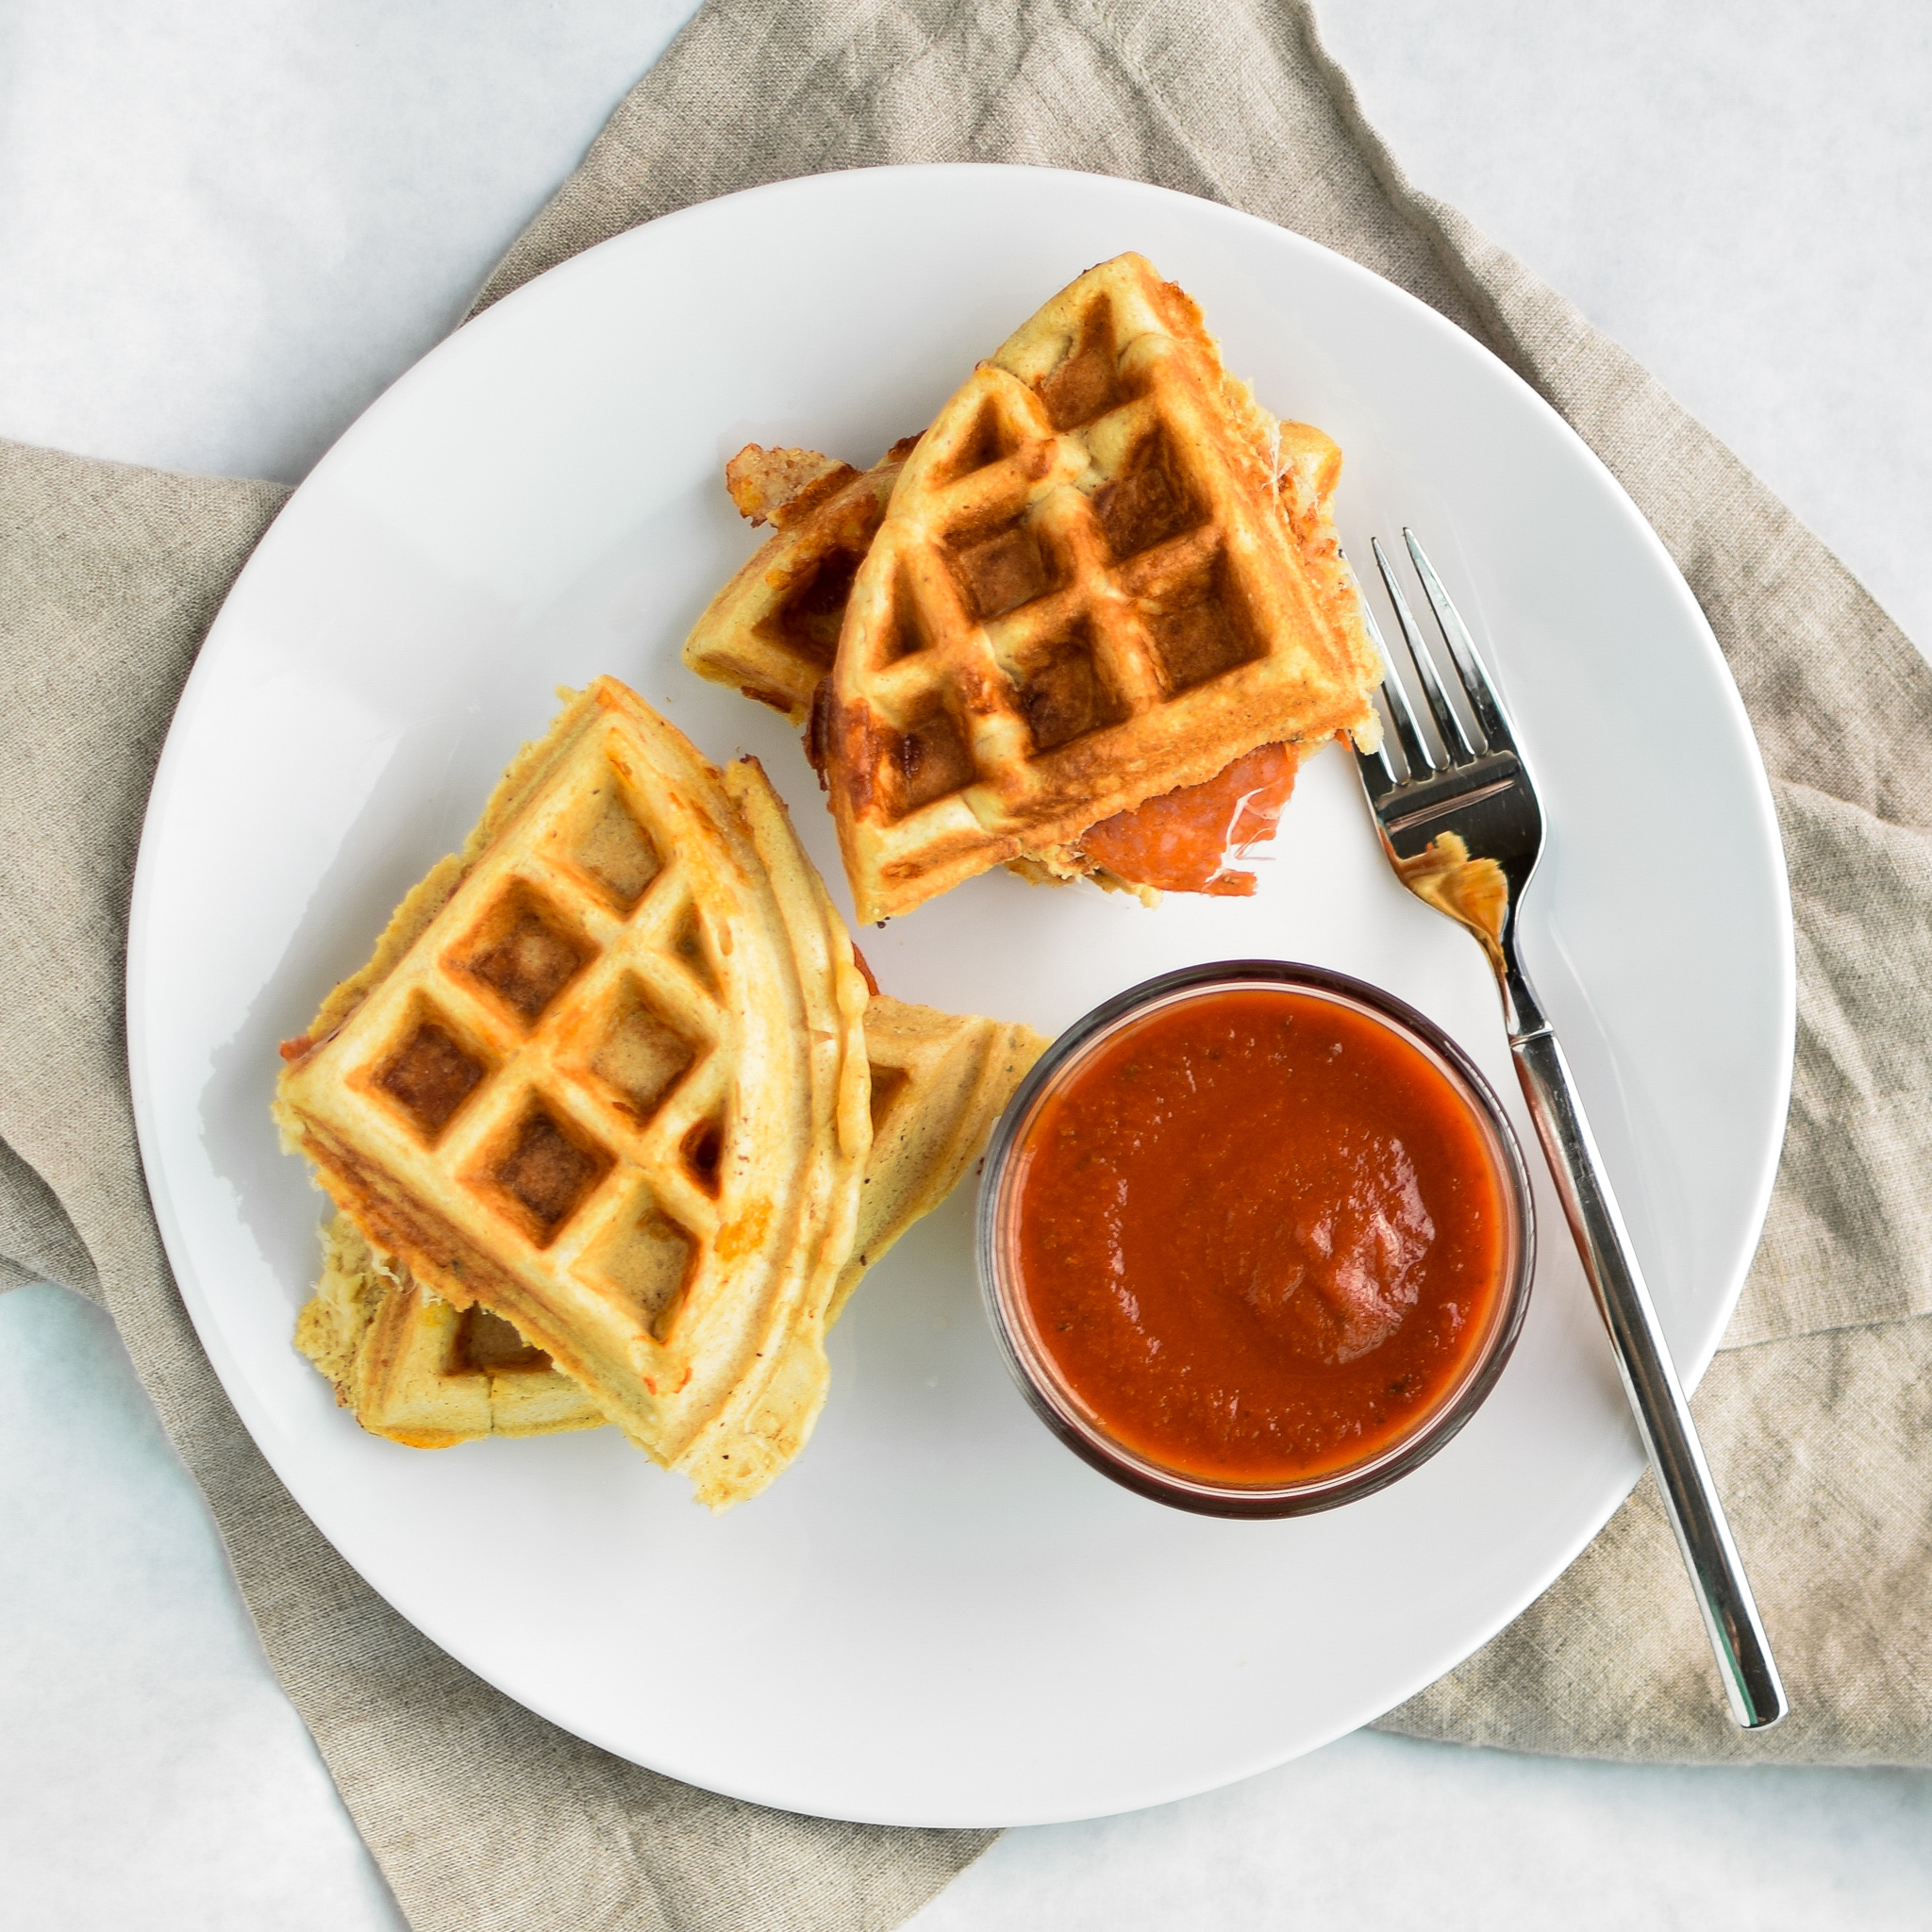 Protein Packed Pepperoni Pizza Waffles - Pizza + Waffles made super easy at home! Stuffed with mozzarella and pepperoni, plus packed with protein! - ProjectMealPlan.com